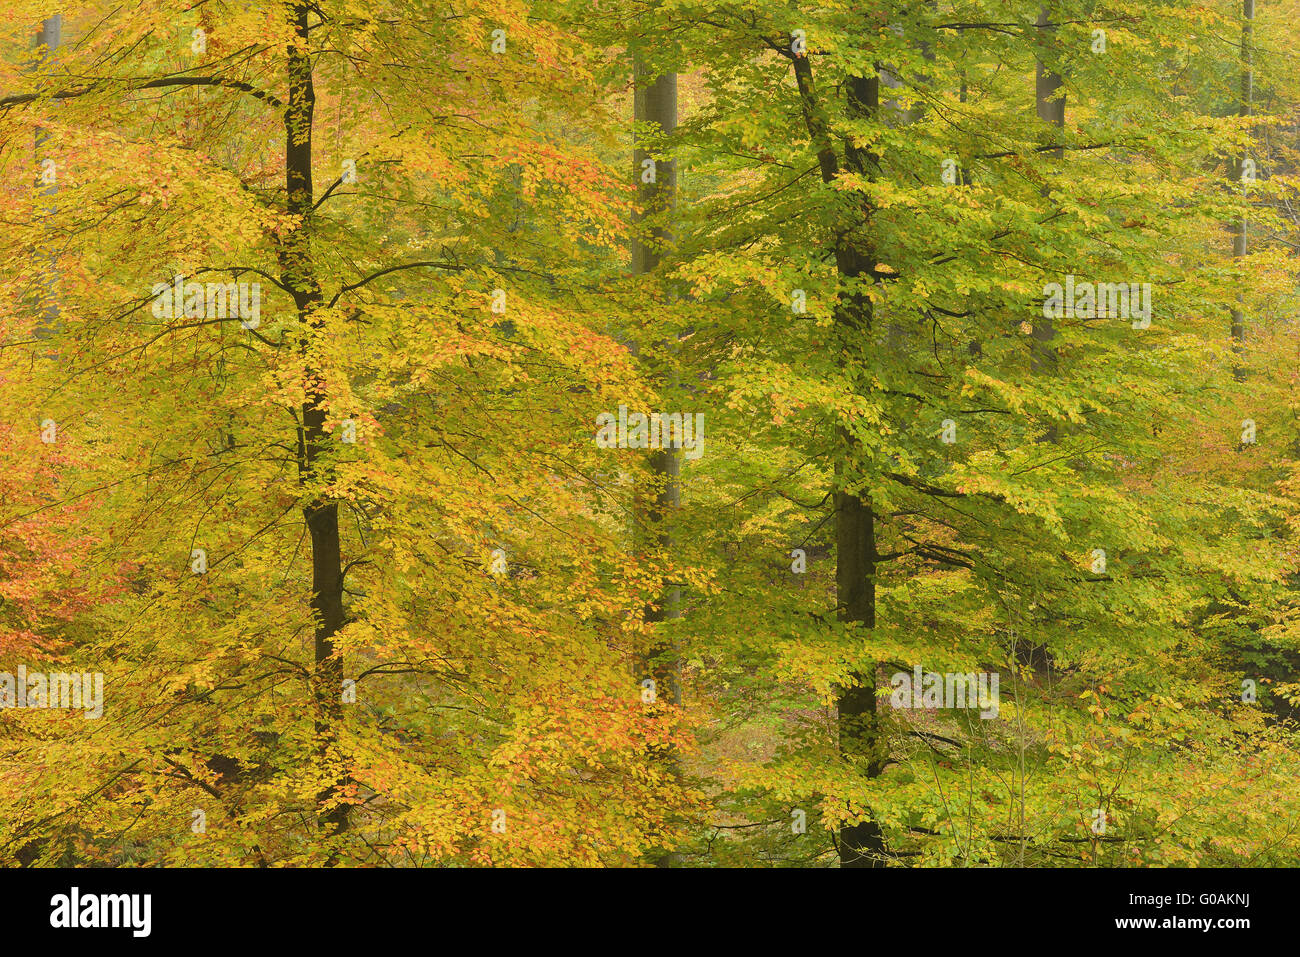 Beech forest, Germany Stock Photo